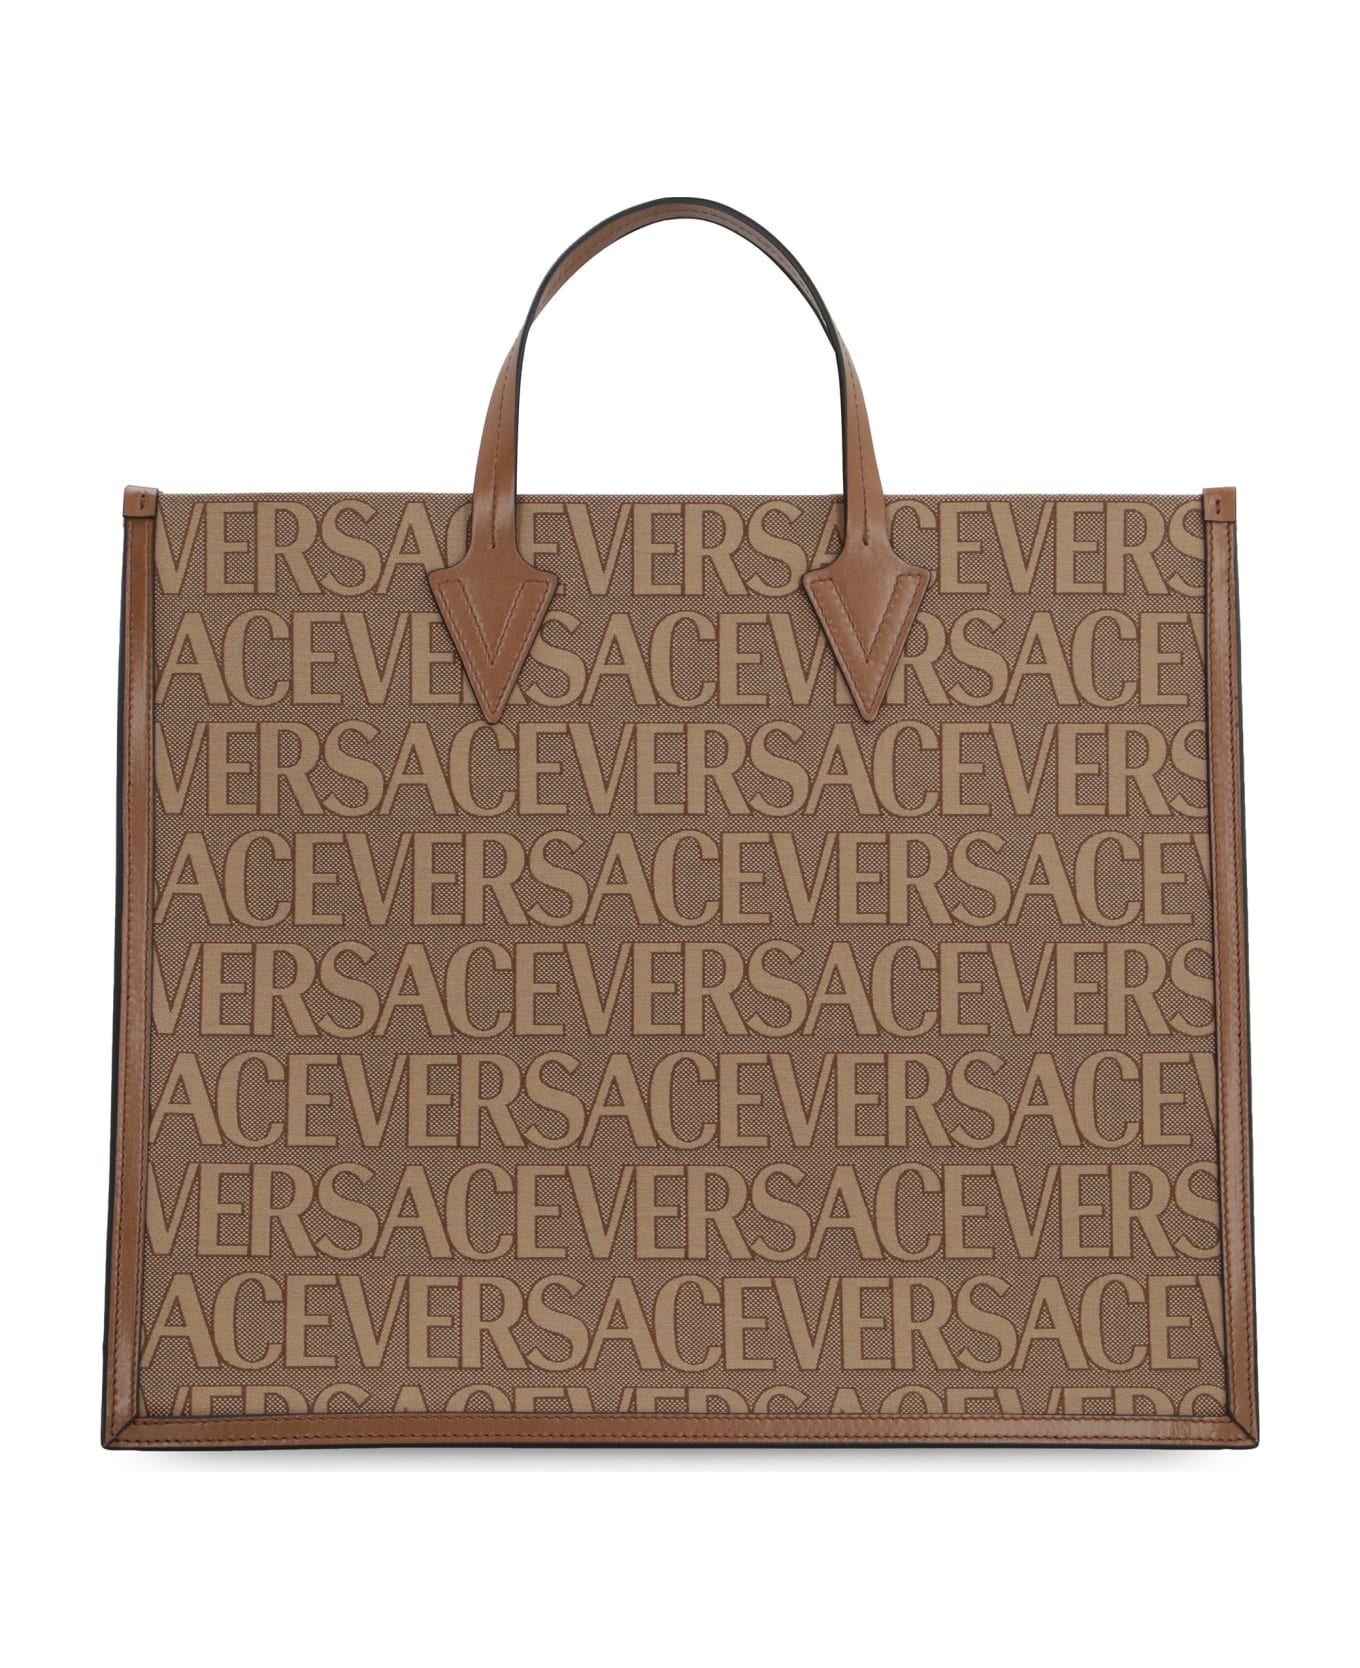 Versace Canvas And Leather Shopping Bag - Beige